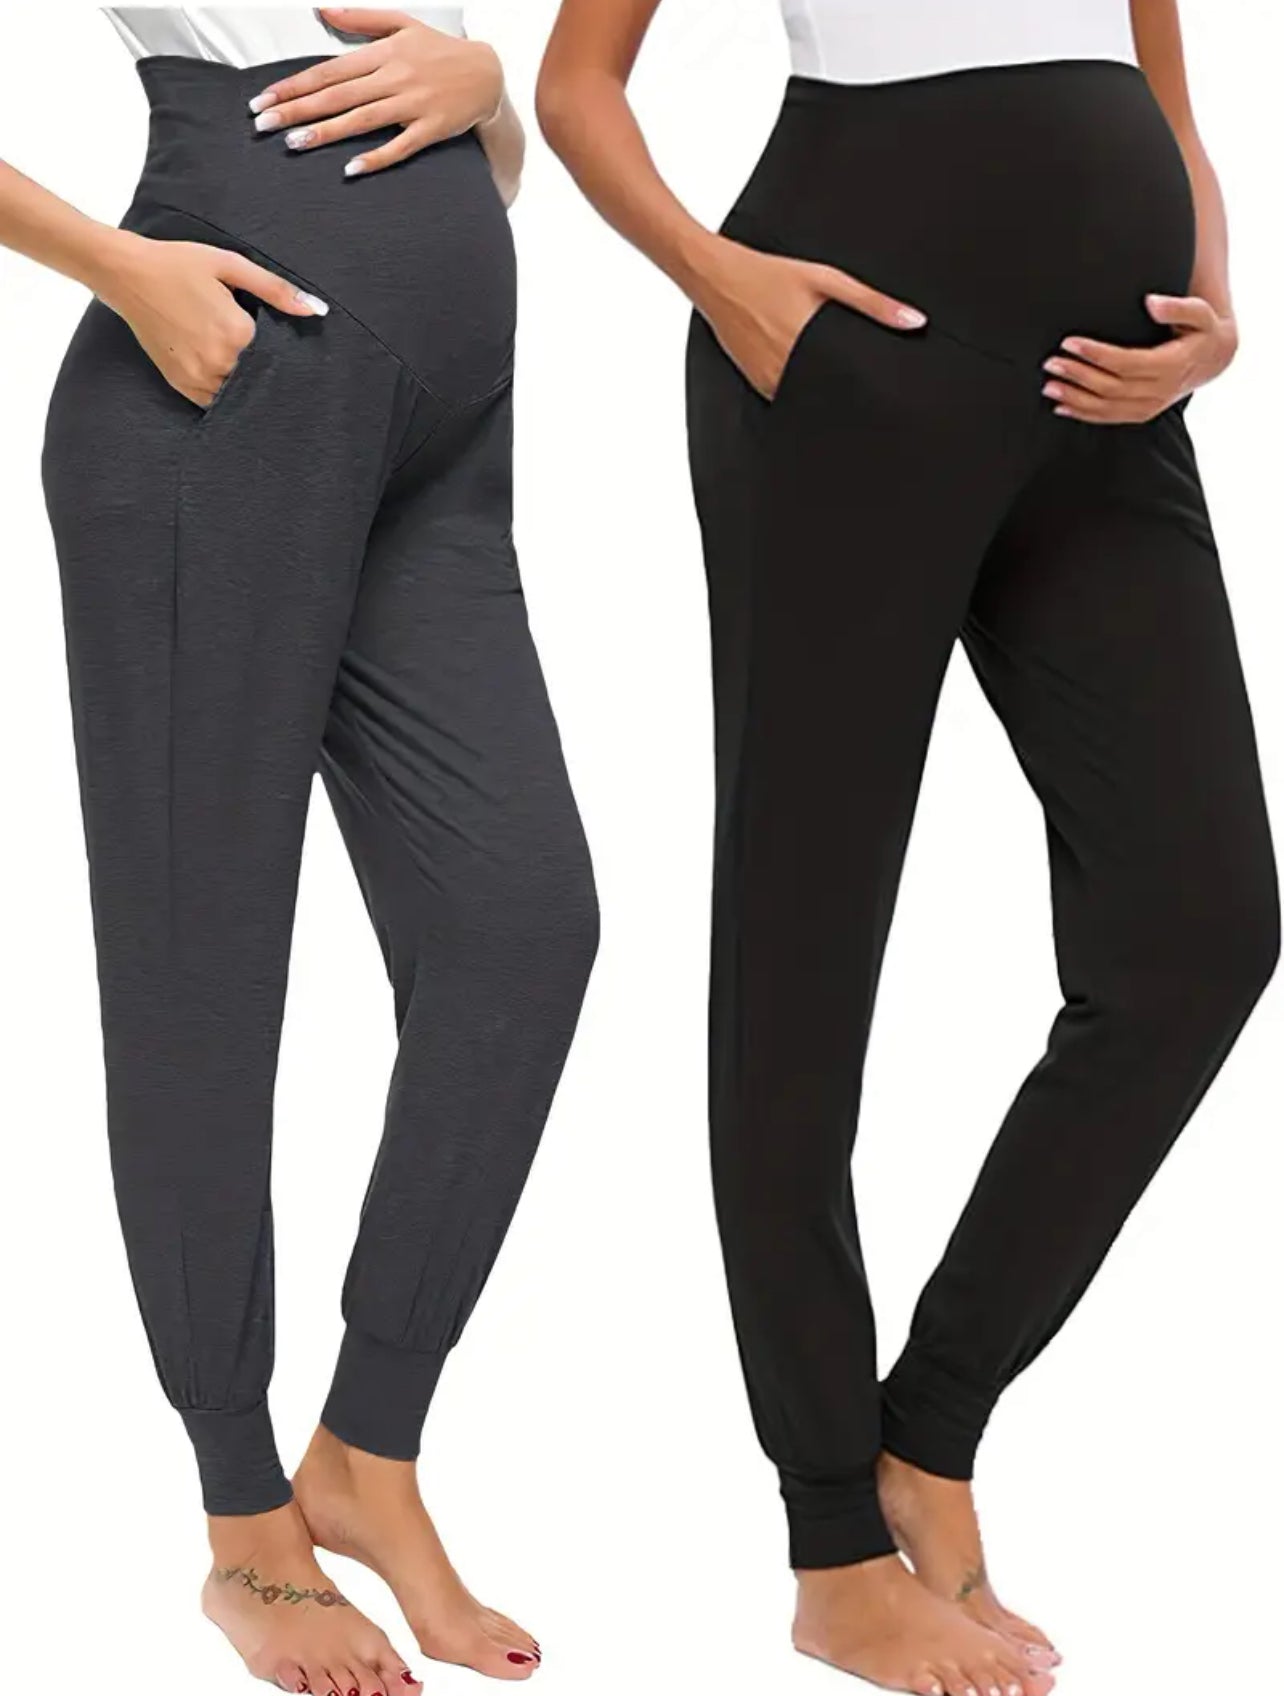 2pcs Comfy High Waist Tummy Support Maternity Sports Yoga Pants With Pocket, Baby Bumps 🌟🌙 Collection